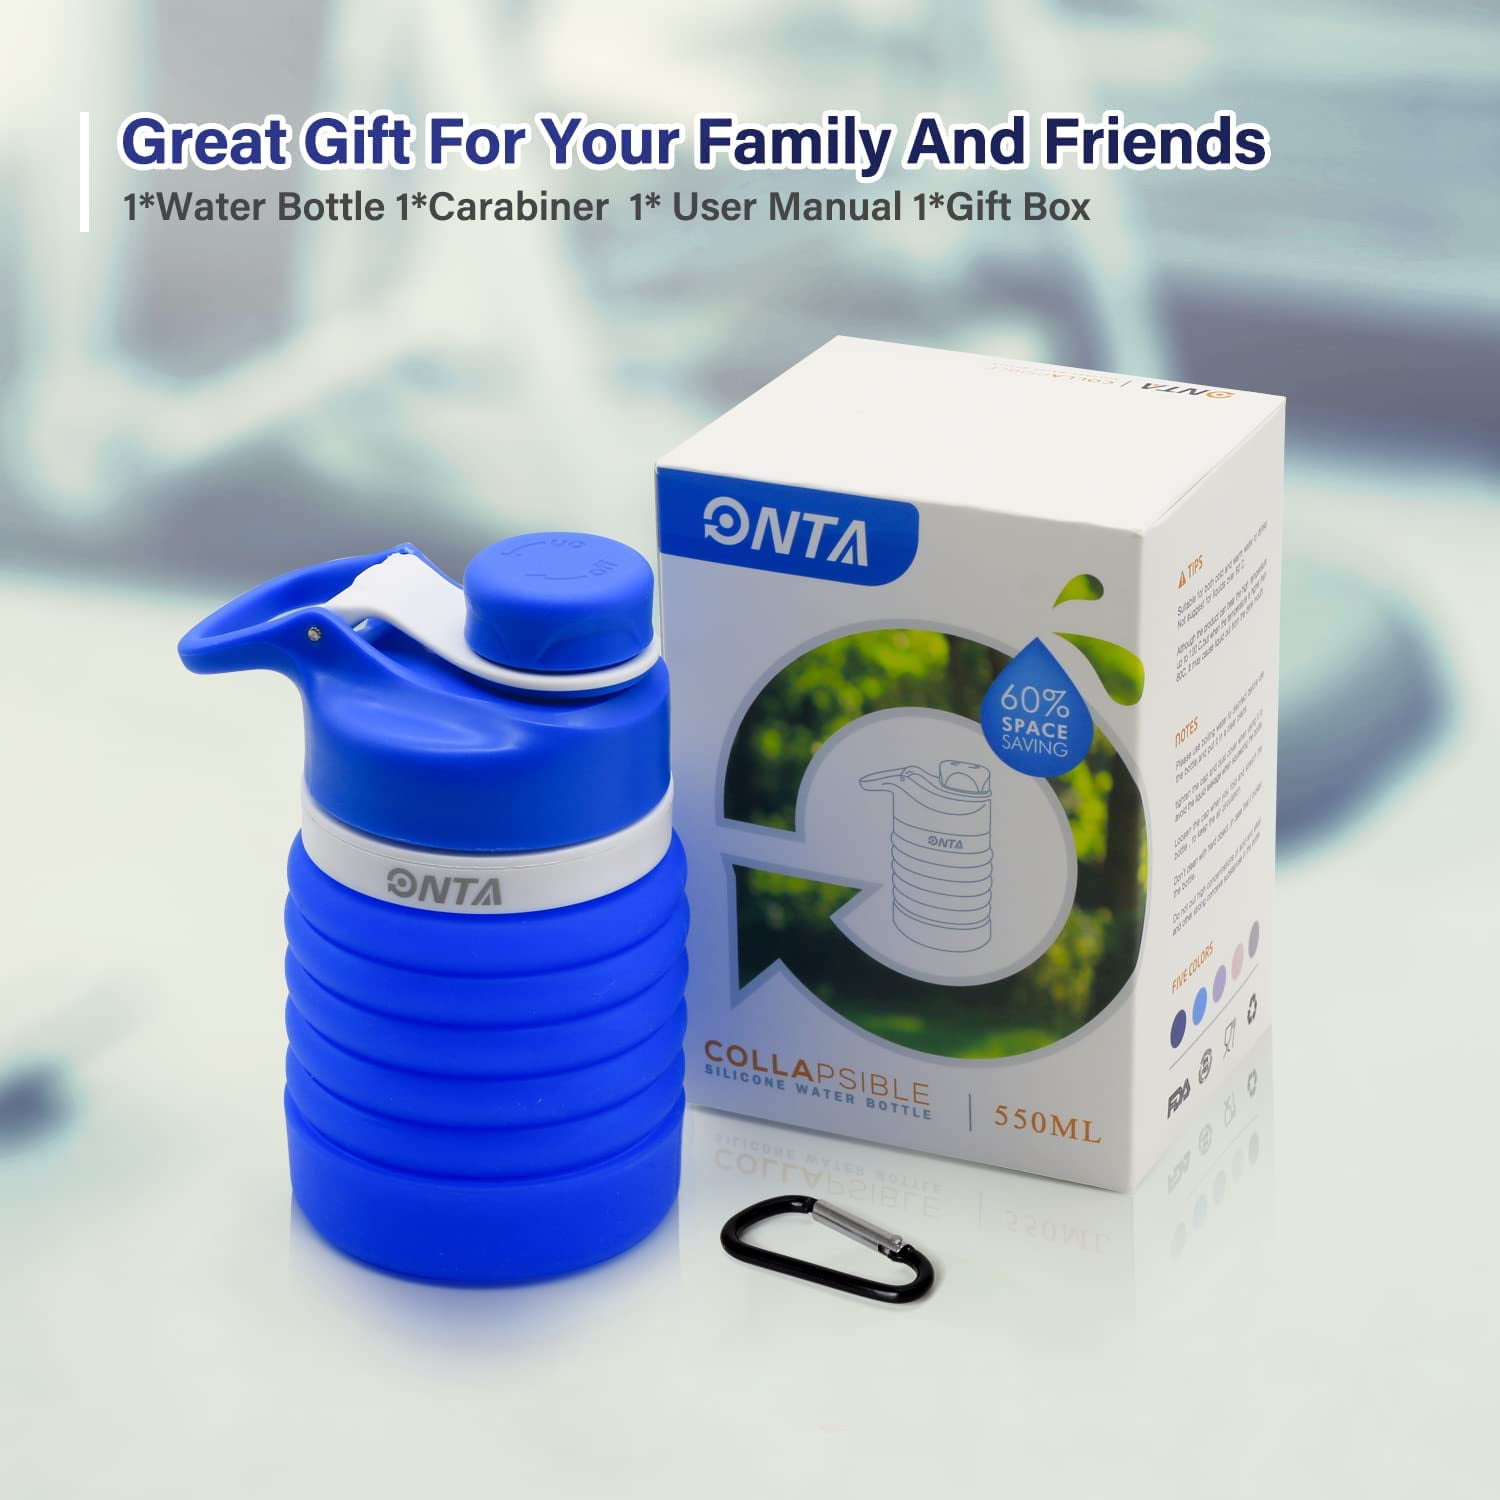 ONTA Collapsible Large Water Bottle - BPA Free Silicone Reusable Flat Water  Cup with Straw Paracord …See more ONTA Collapsible Large Water Bottle 